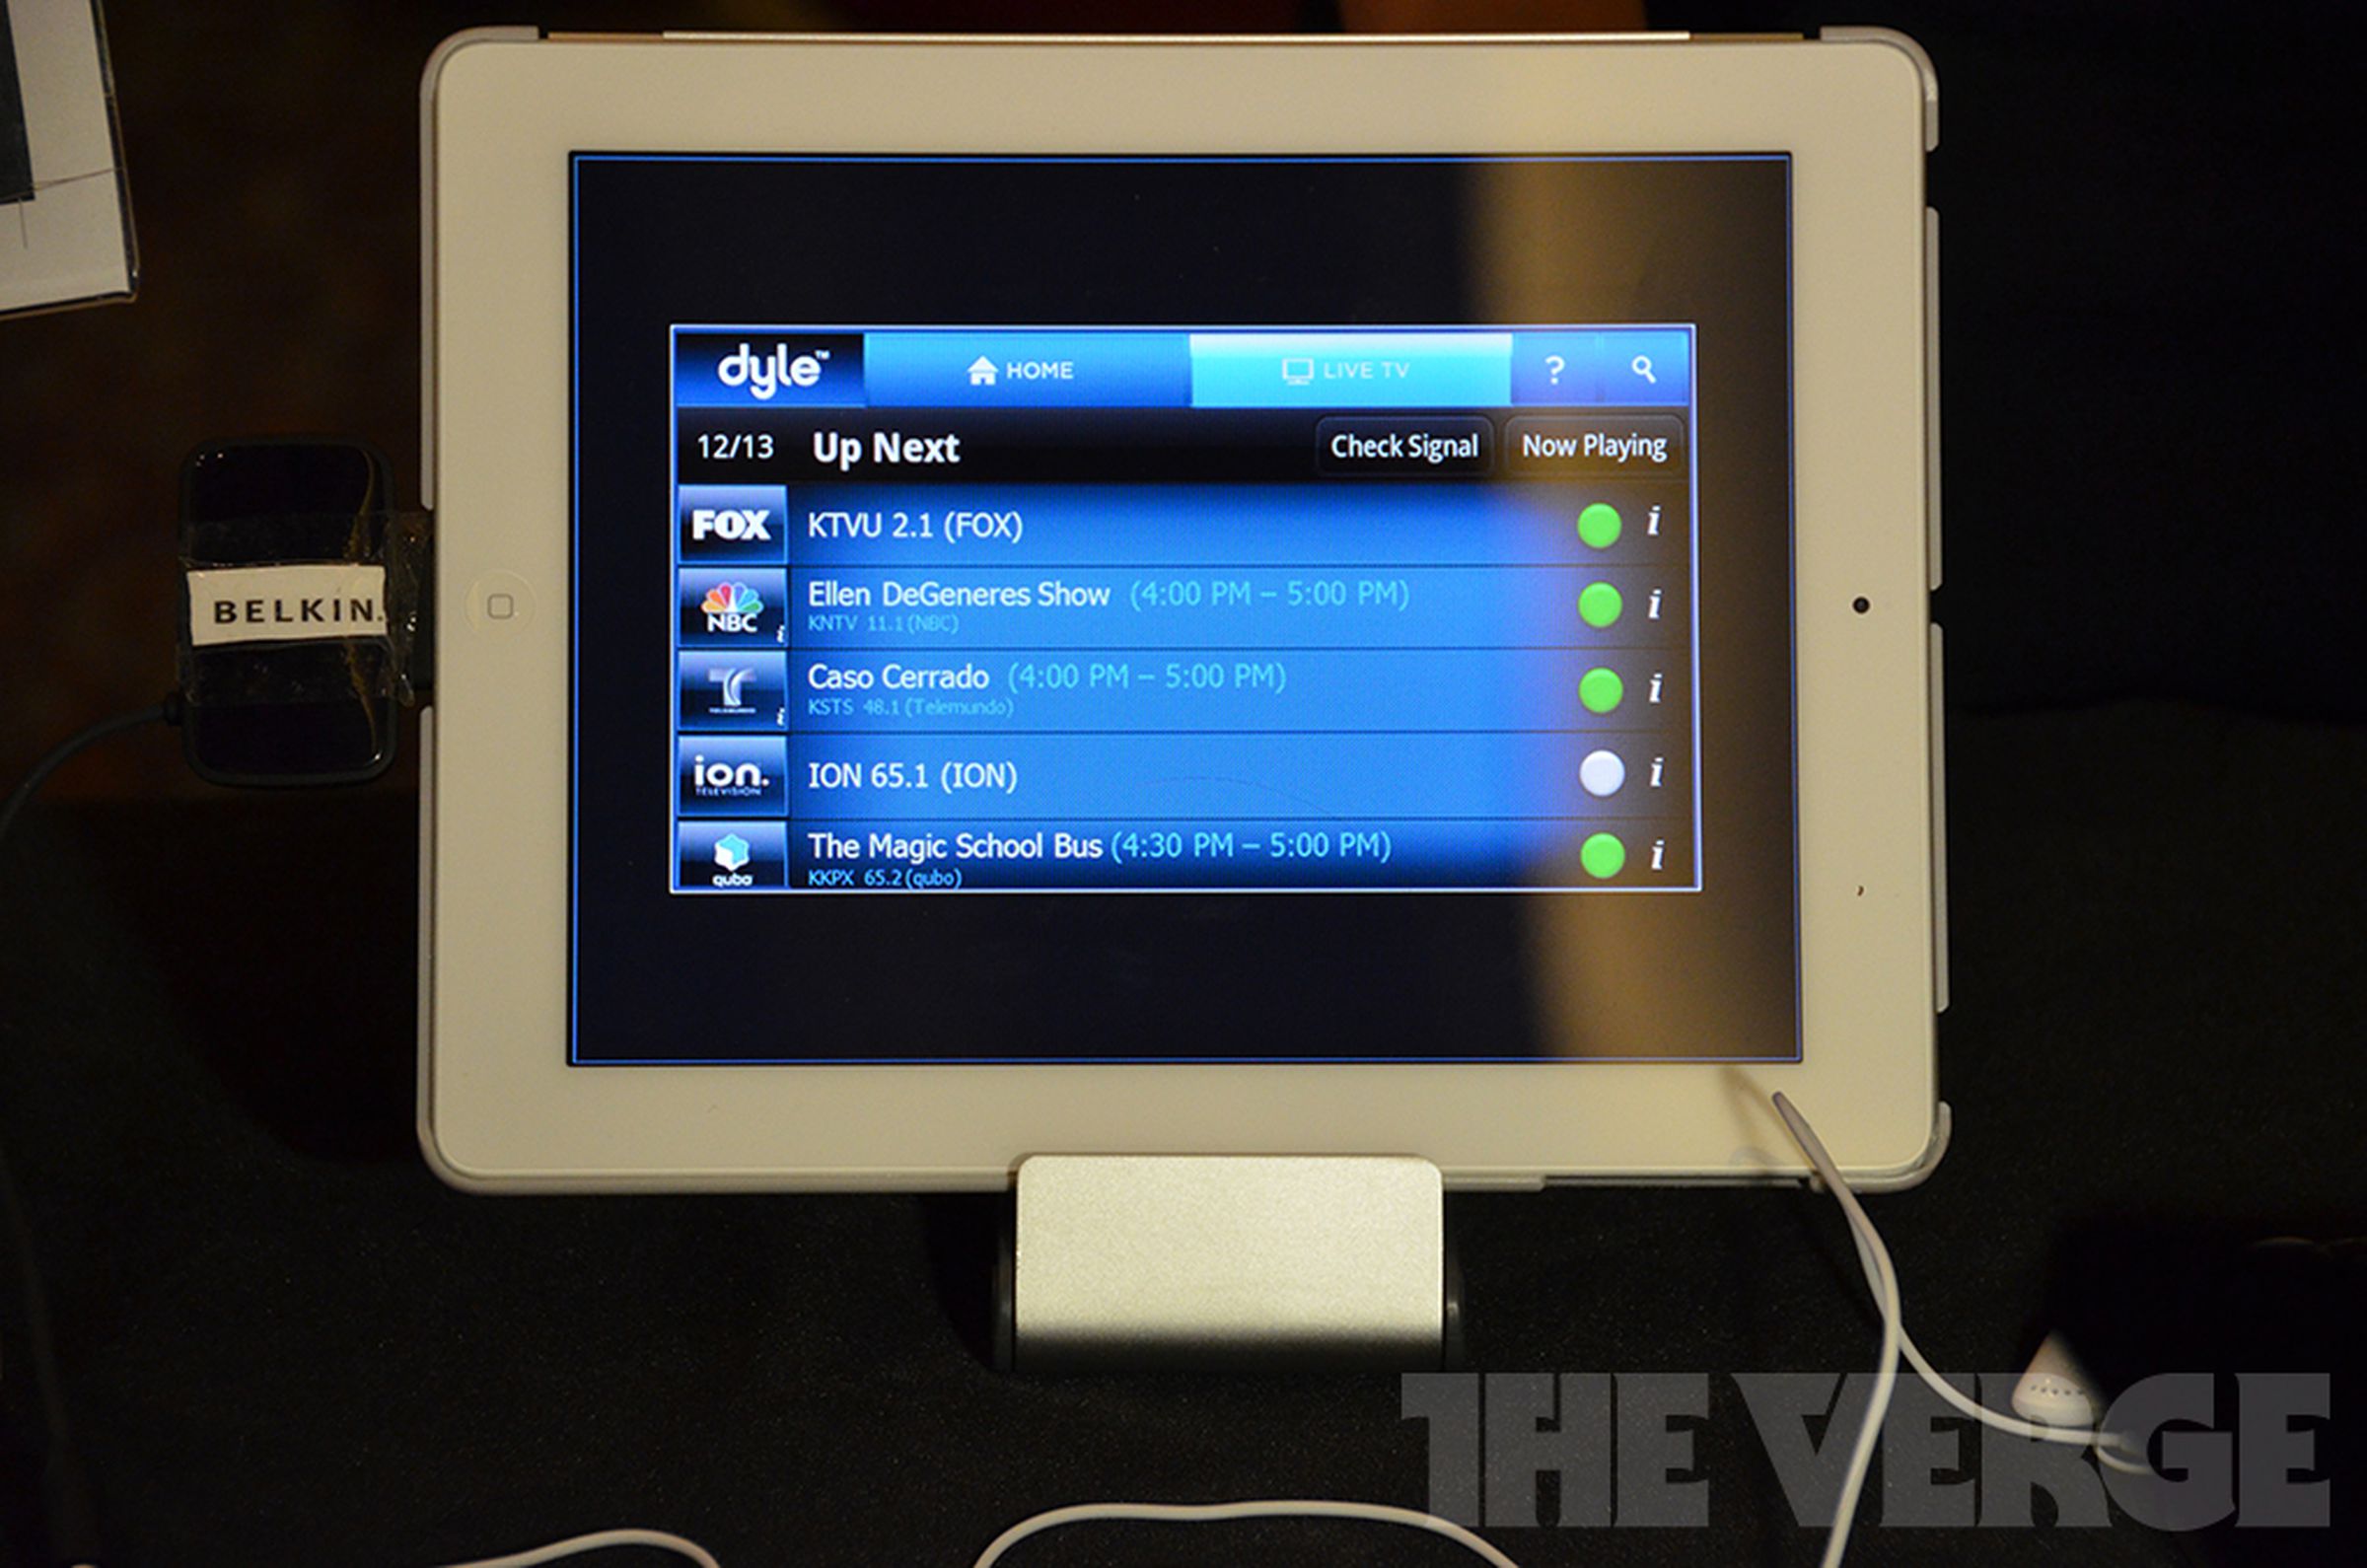 Belkin prototype iOS dongle for Dyle Mobile TV hands-on photos